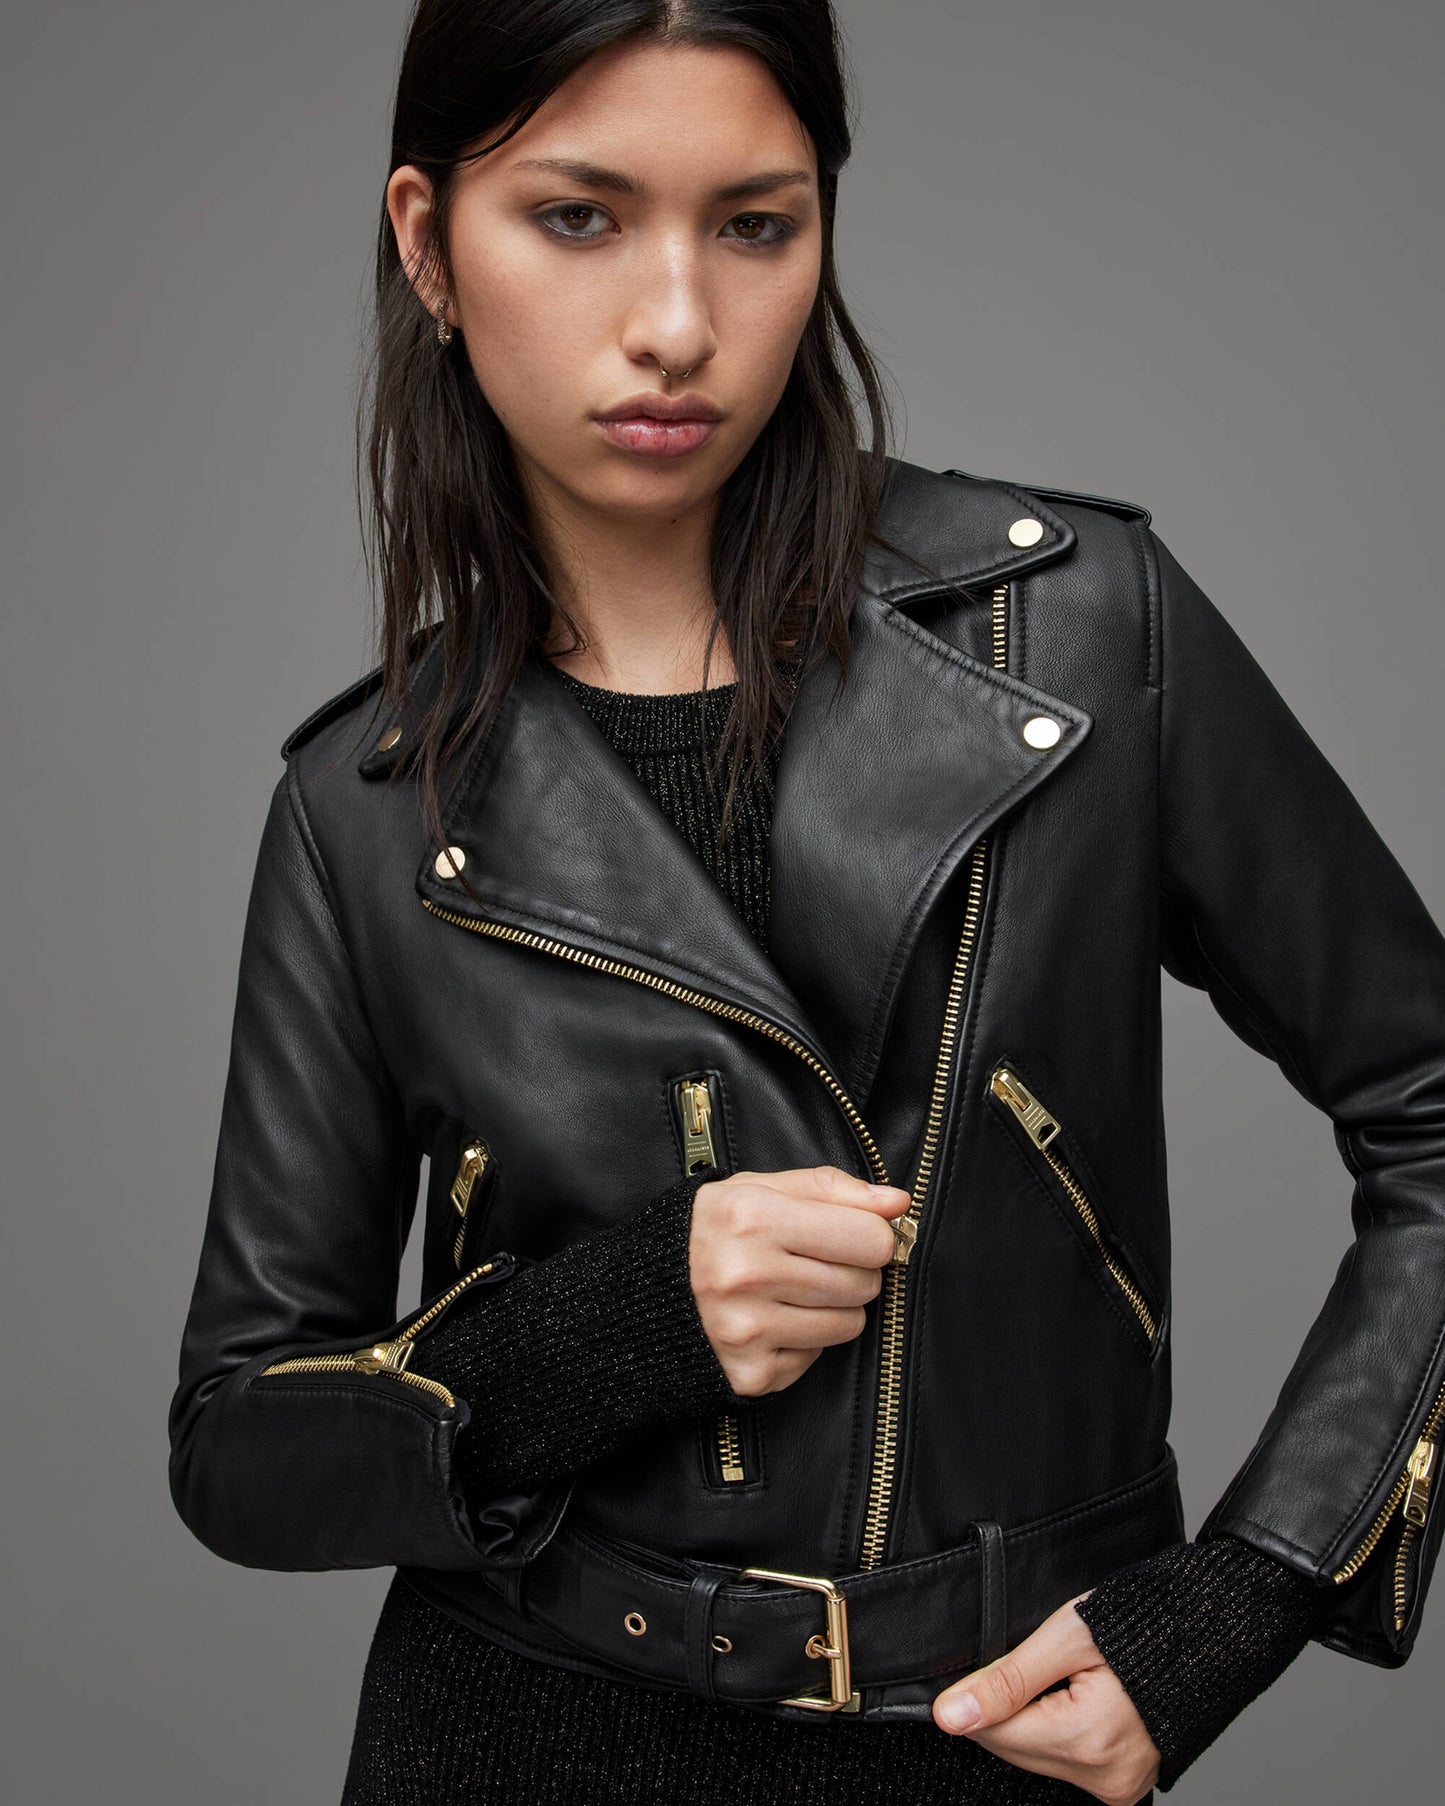 Women's Biker Leather Jacket In Black With Gold Tone Zippers